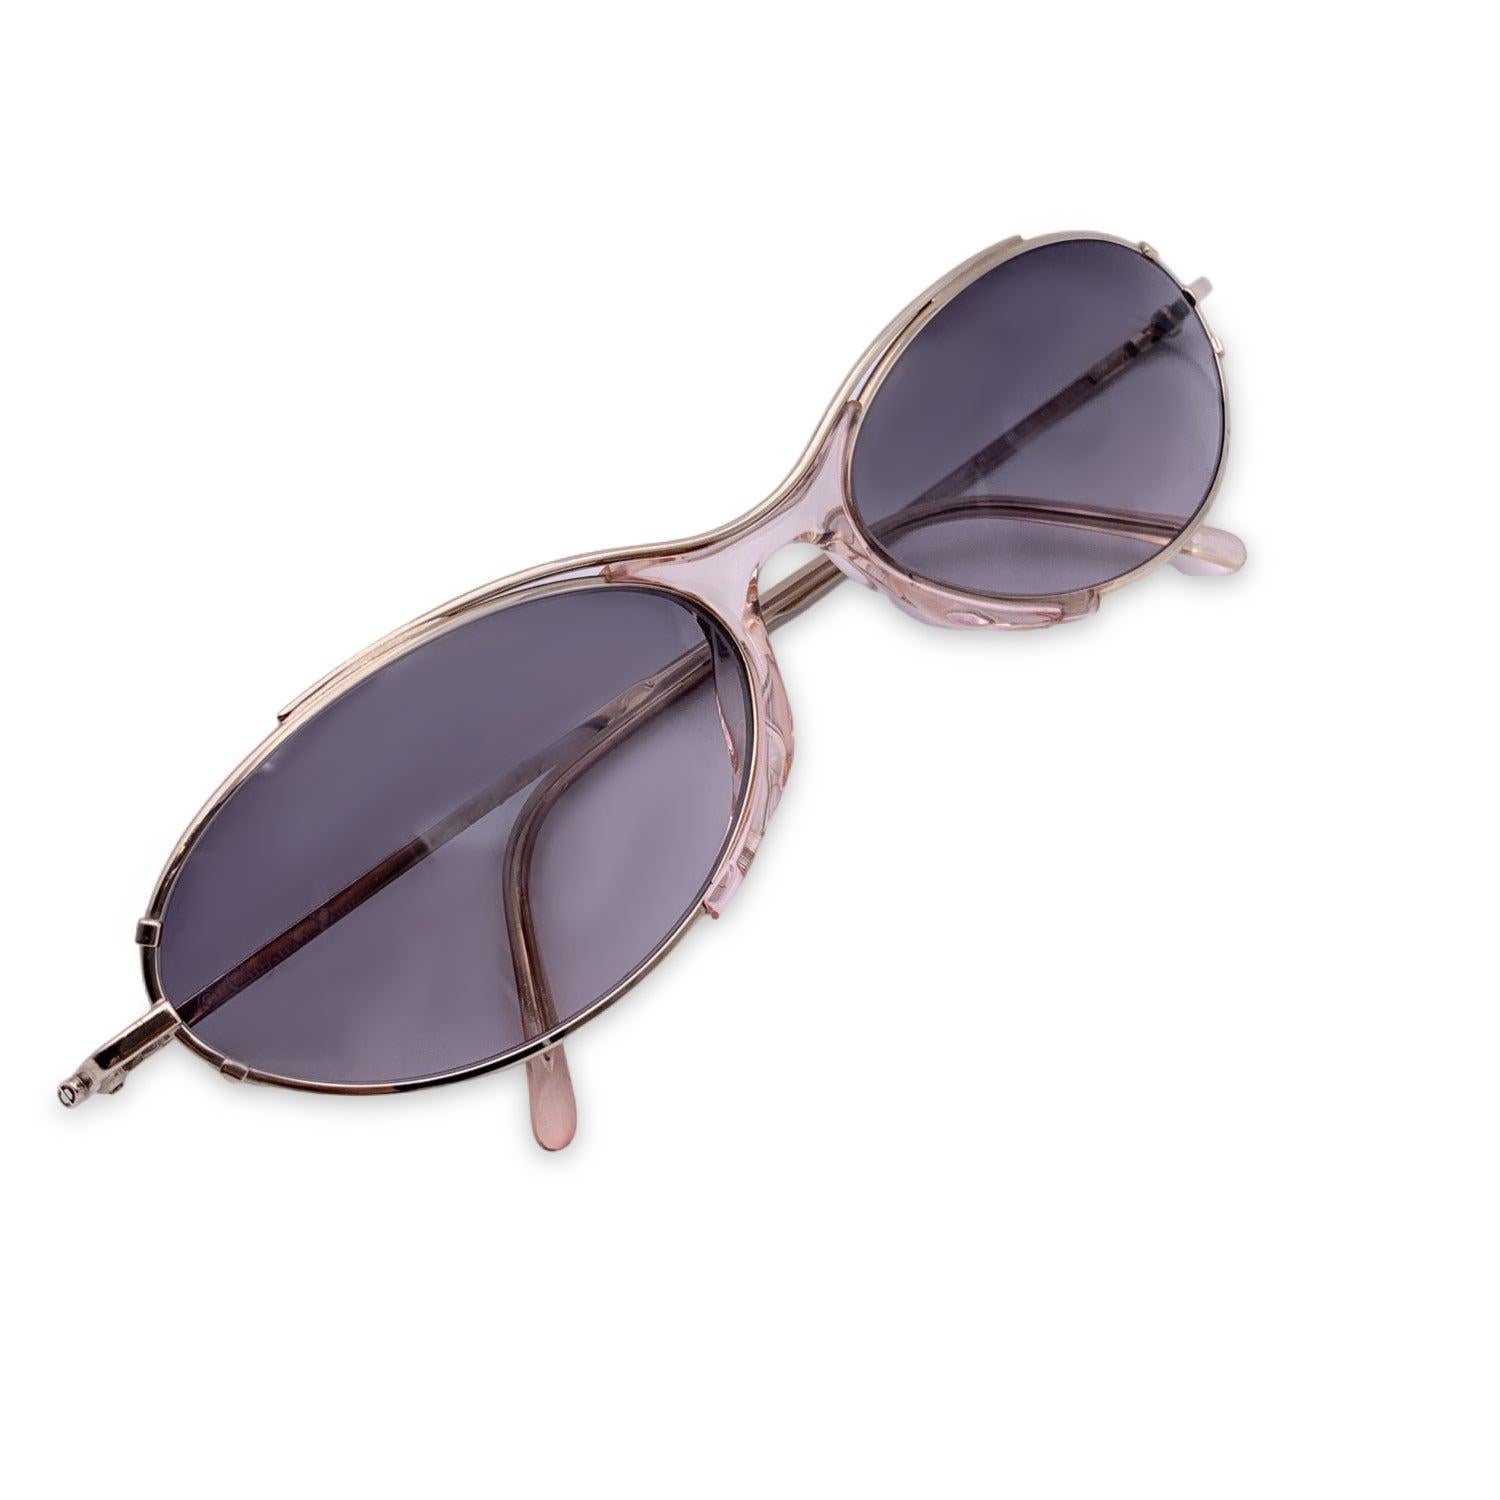 Vintage Christian Dior Women Sunglasses, Mod. 2551 40. Size: 58/18 130mm. Silver metal frame, with a transparent pink detail on the bridge. CD logo on silver temples. 100% Total UVA/UVB protection. Grey gradient lenses. Details MATERIAL: Metal